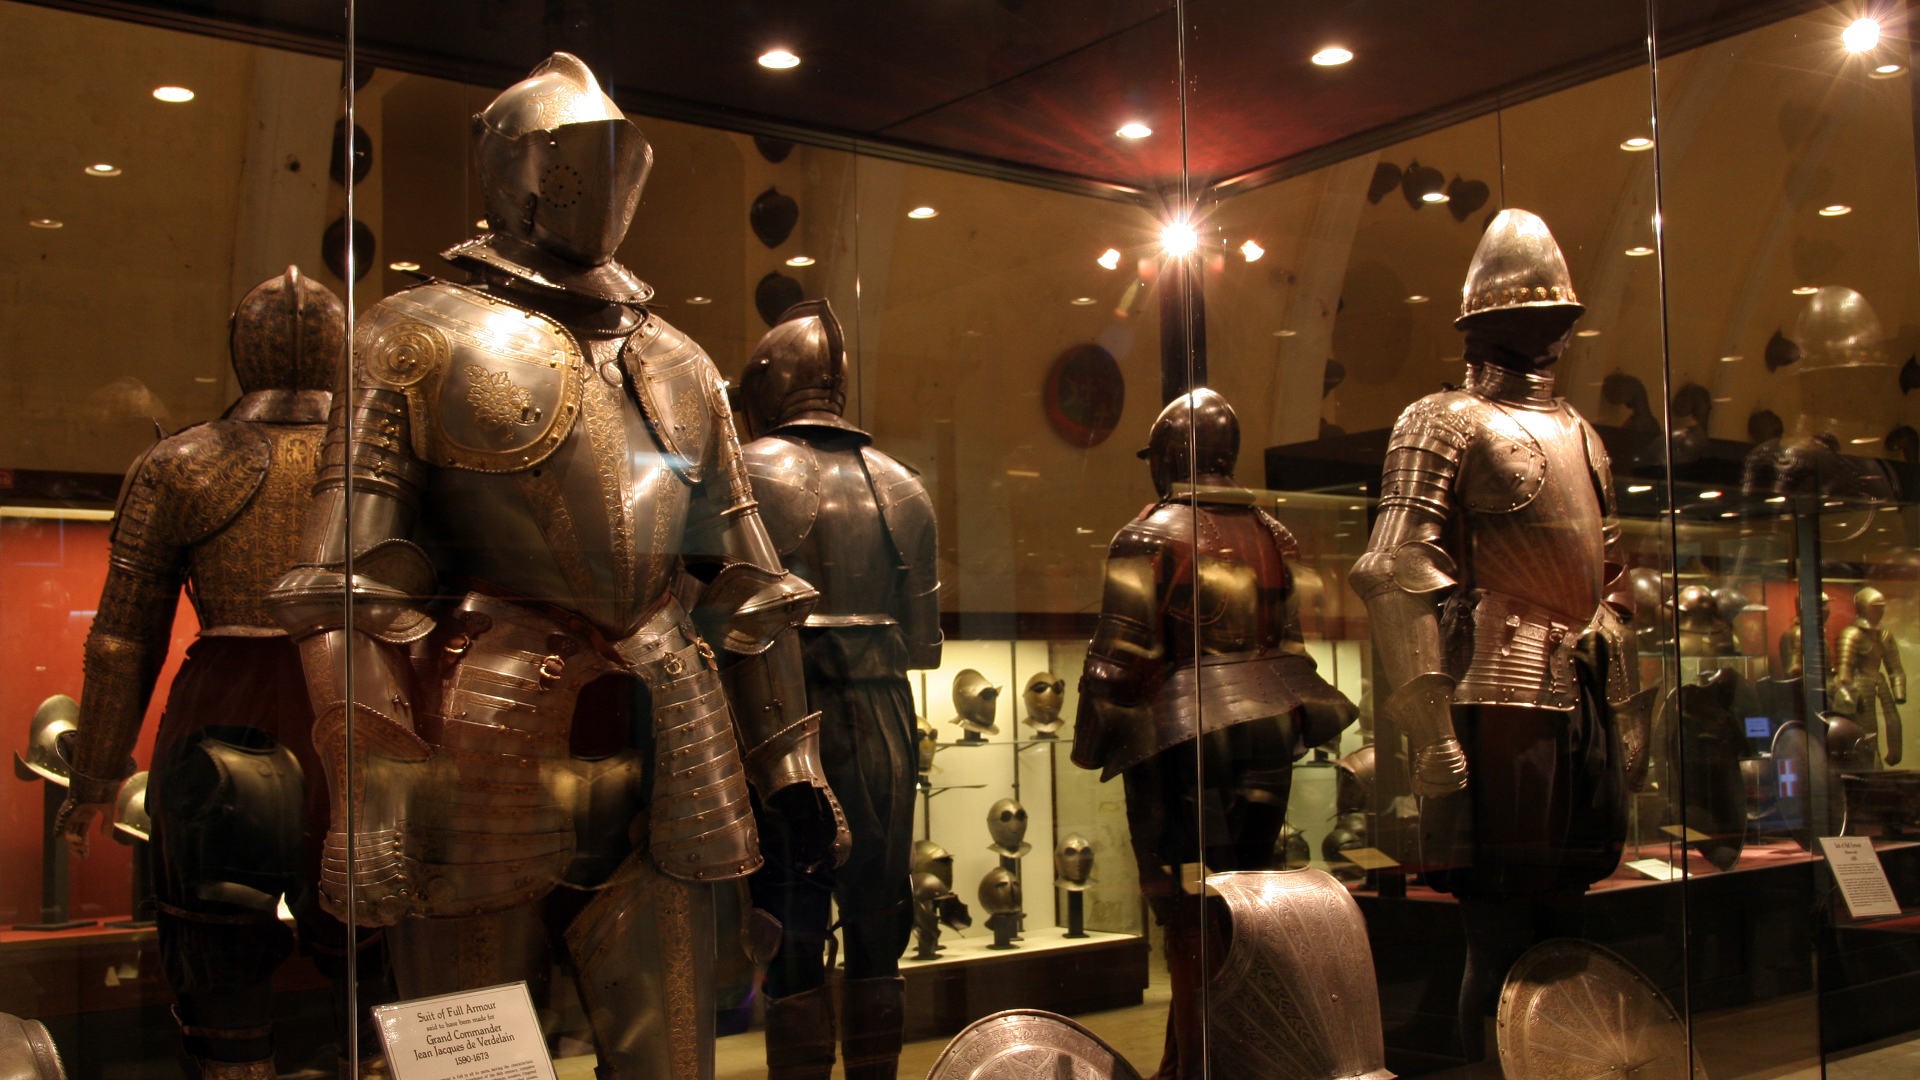 The Grandmaster's Palace and Armoury: Planning Your Visit